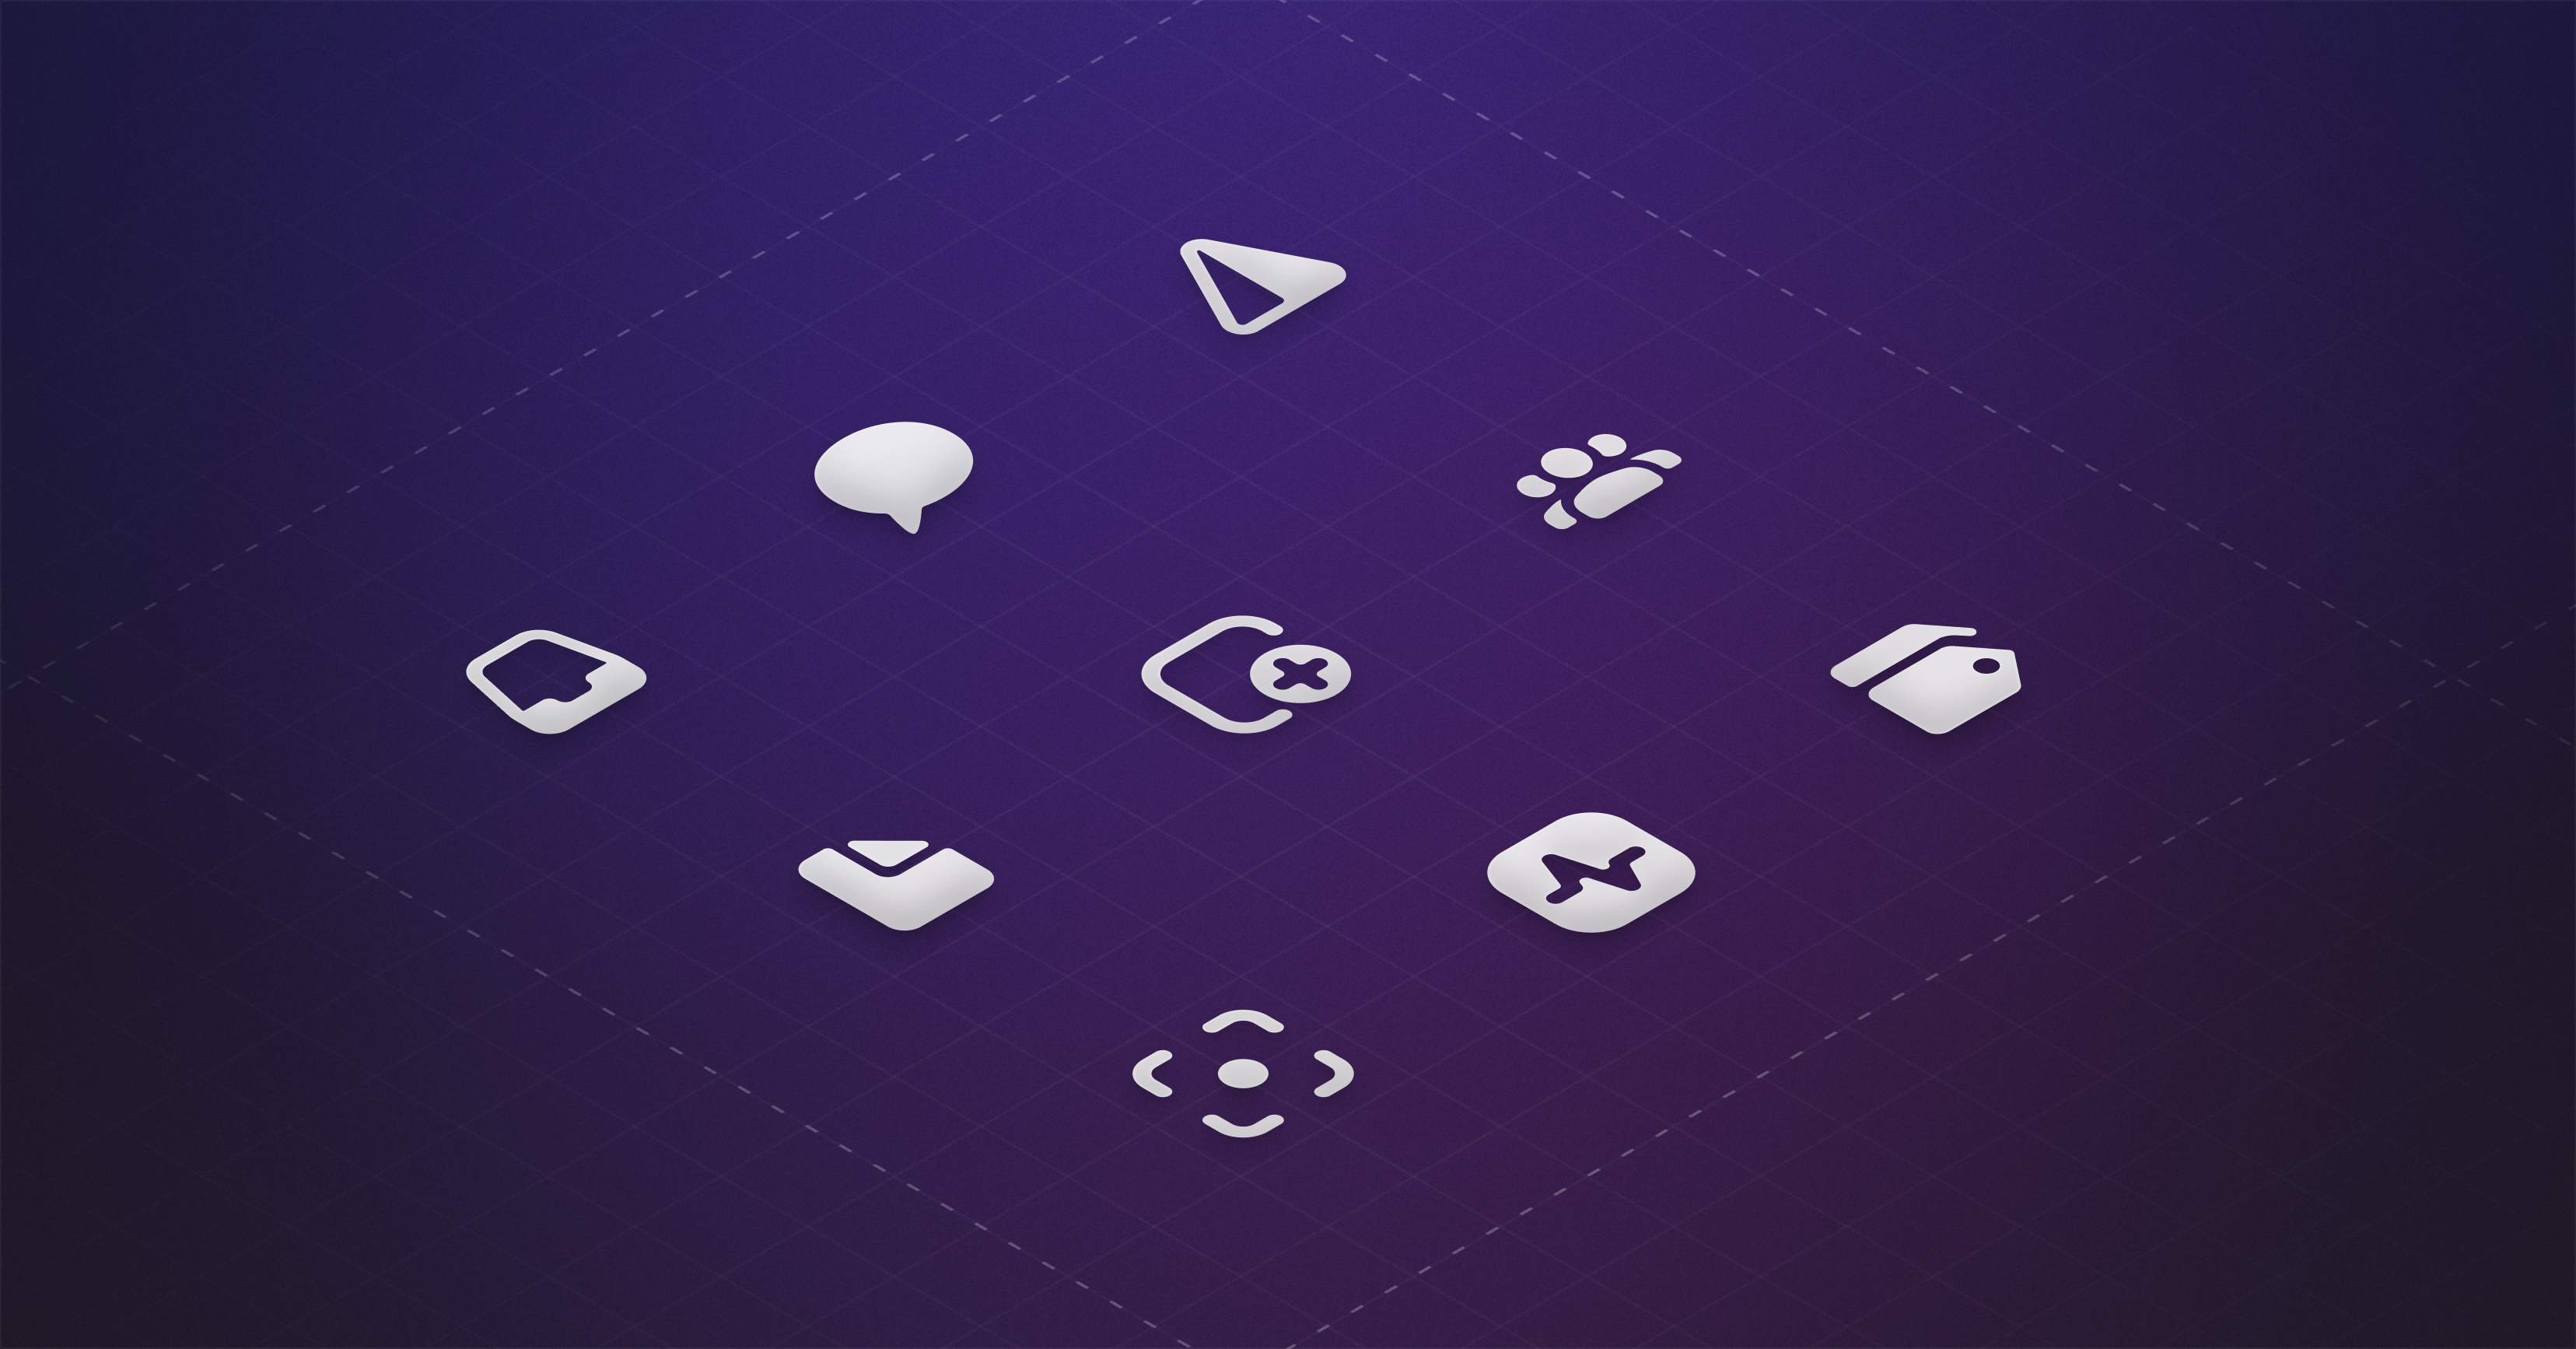 Design system grid with icons representing different features in the app